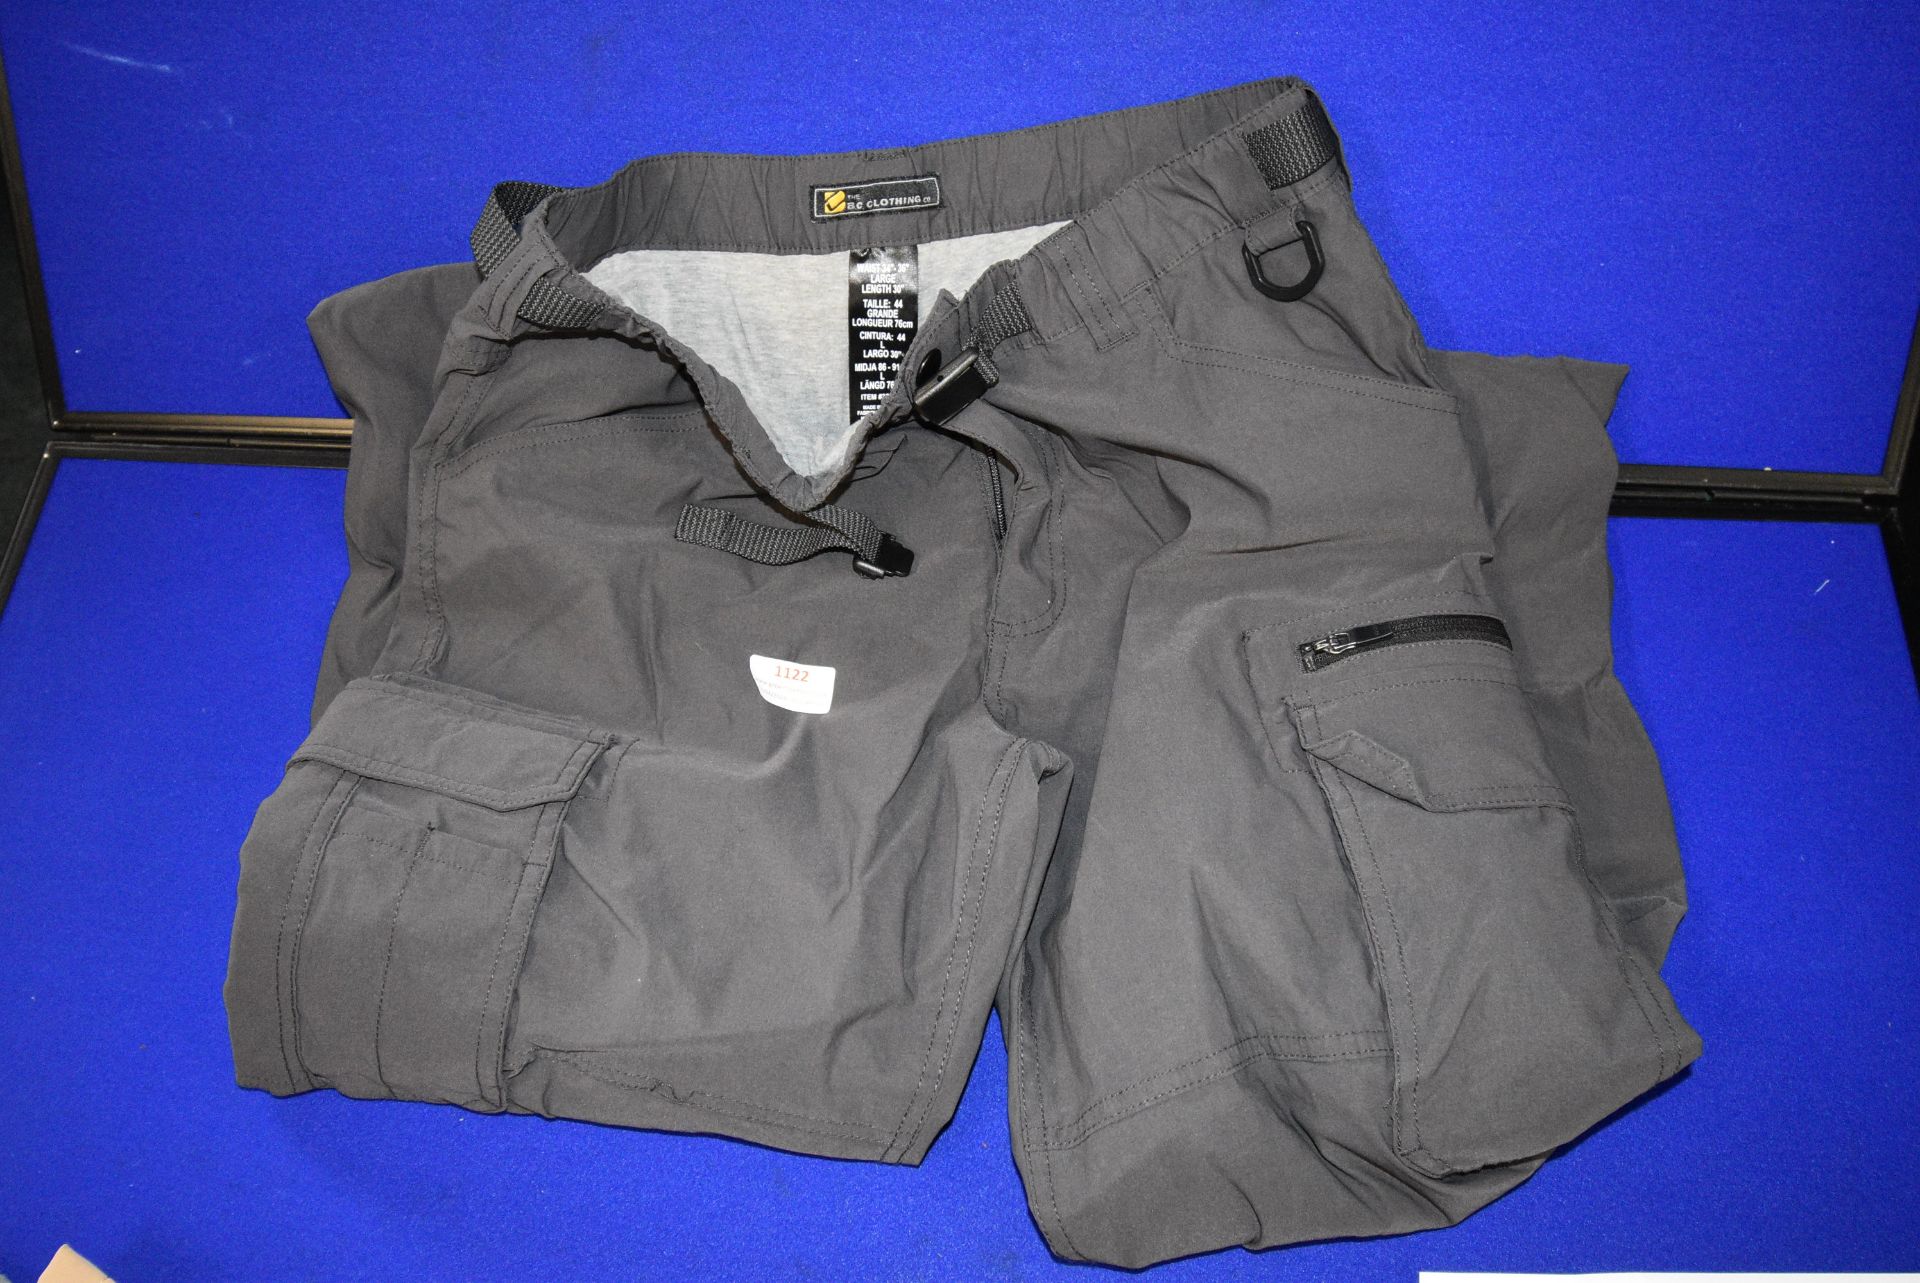 *BC Clothing Activity Trousers Size: 34x36